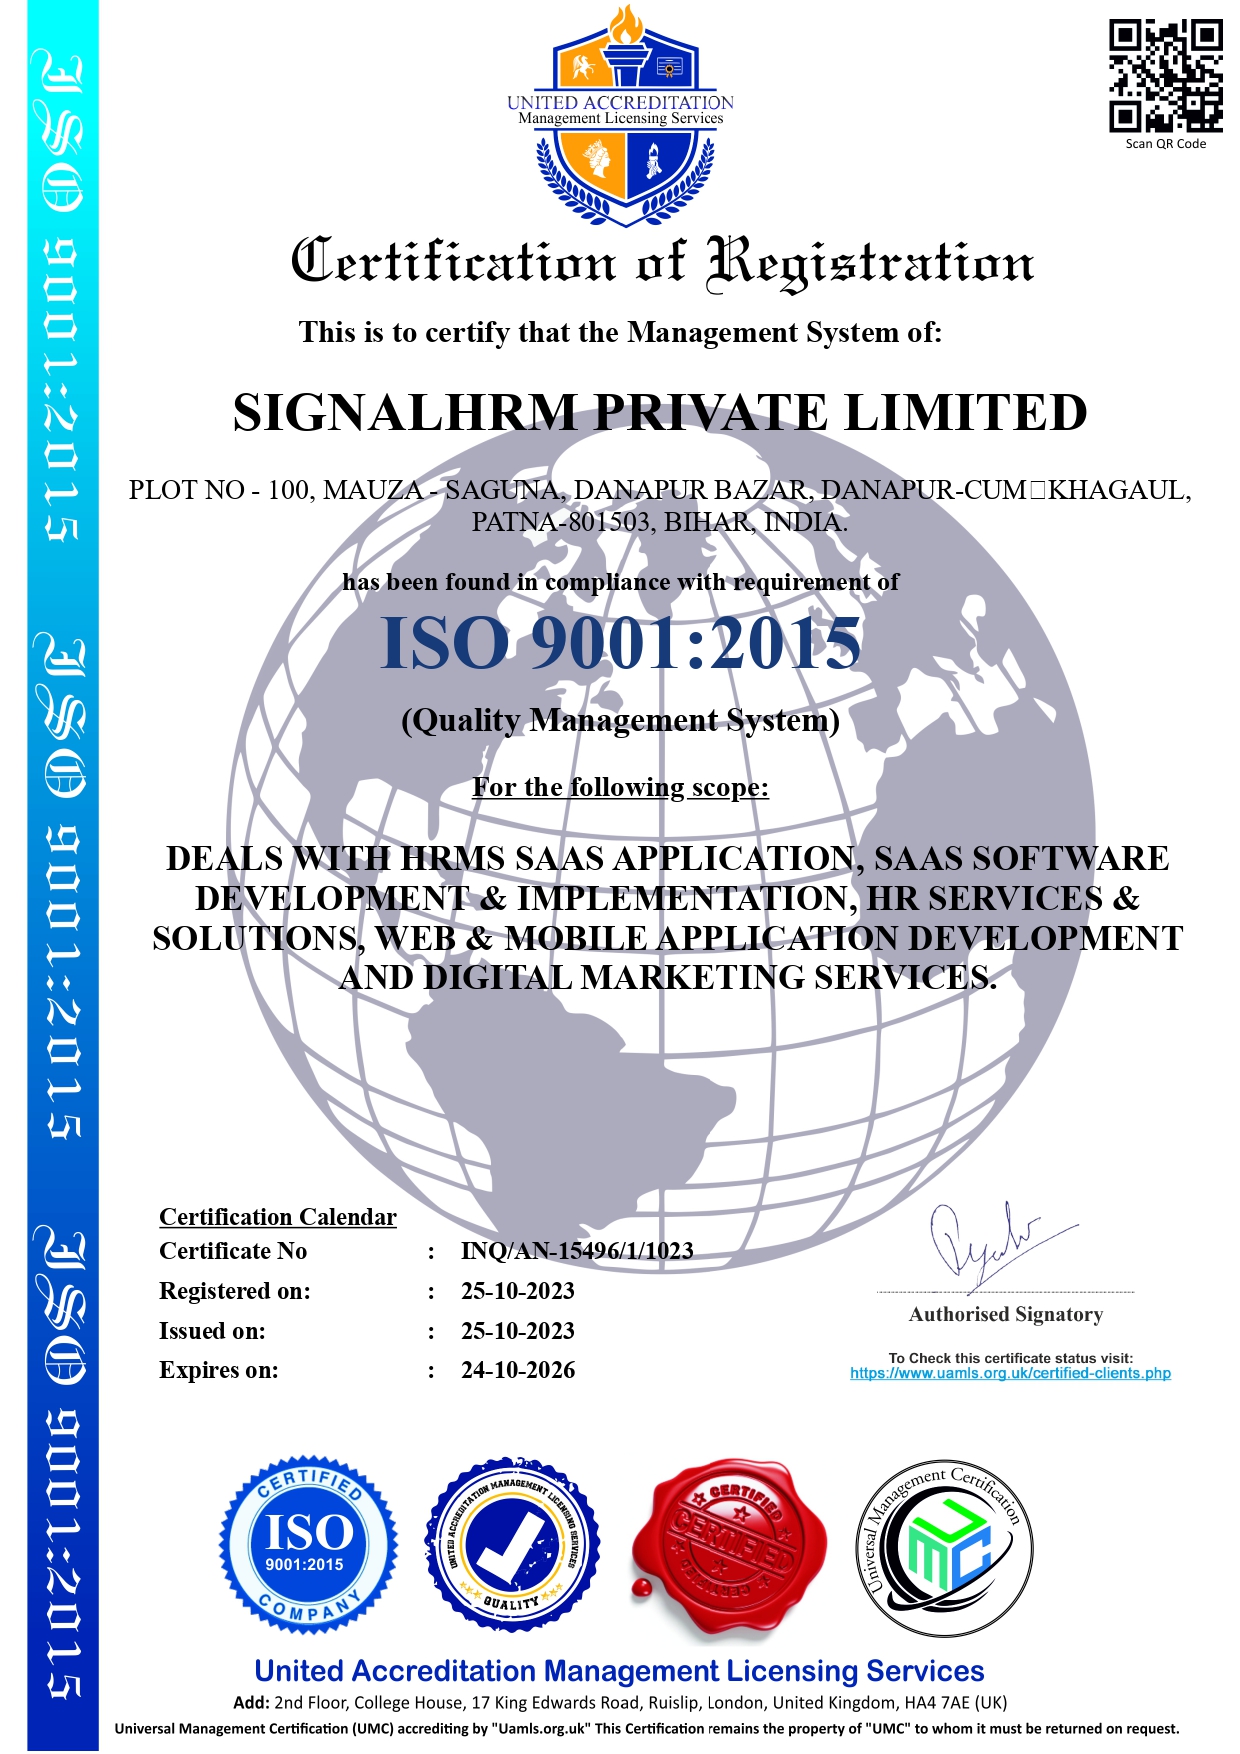 iso certified software development company